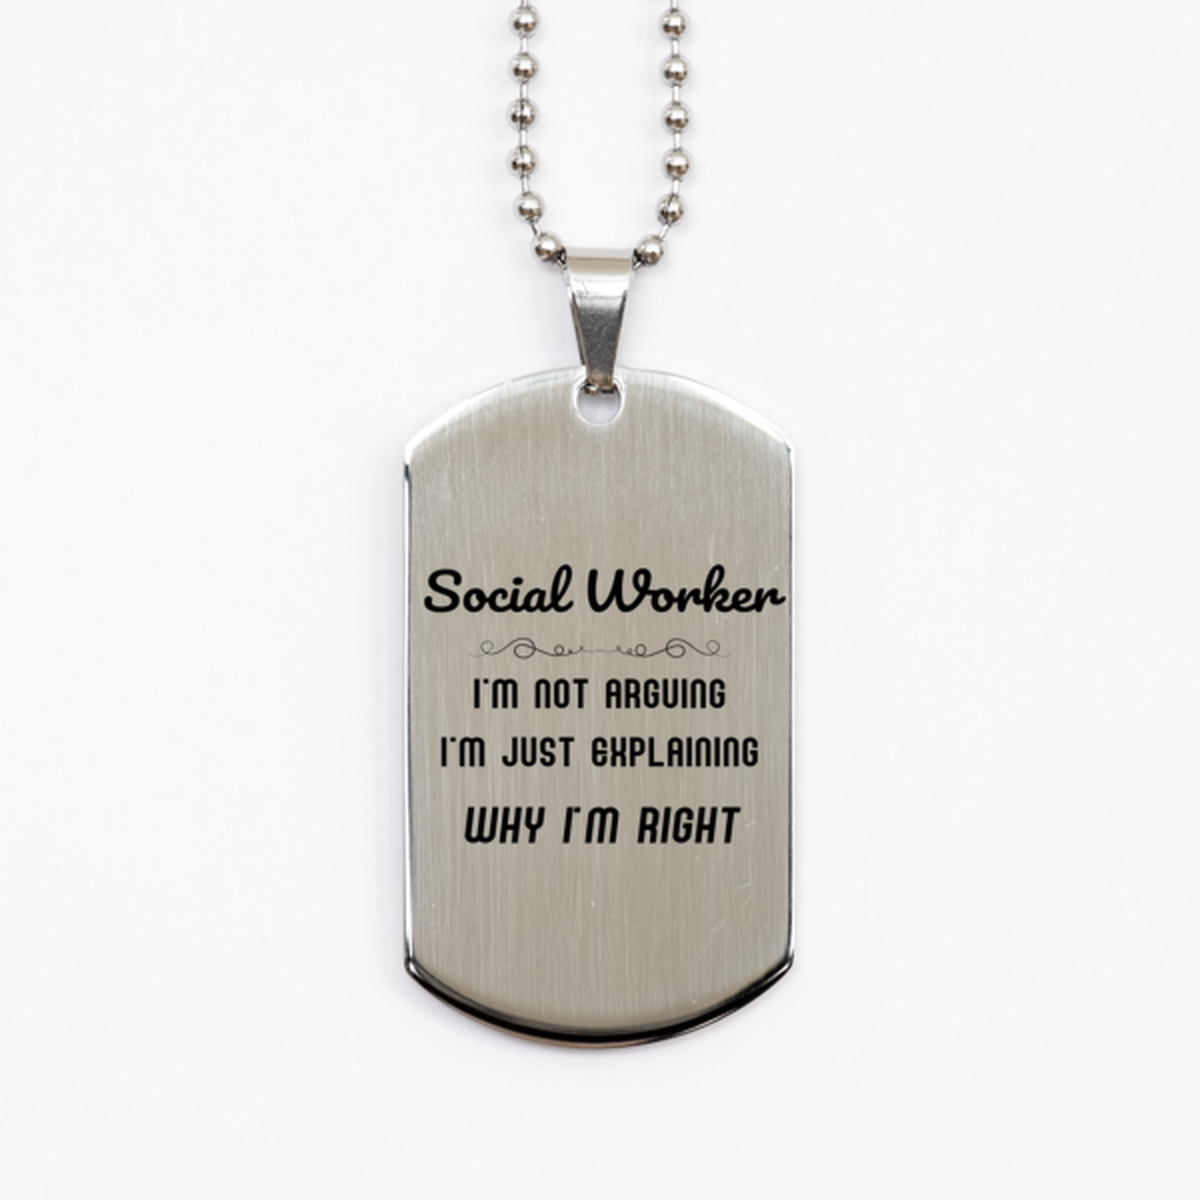 Social Worker I'm not Arguing. I'm Just Explaining Why I'm RIGHT Silver Dog Tag, Funny Saying Quote Social Worker Gifts For Social Worker Graduation Birthday Christmas Gifts for Men Women Coworker